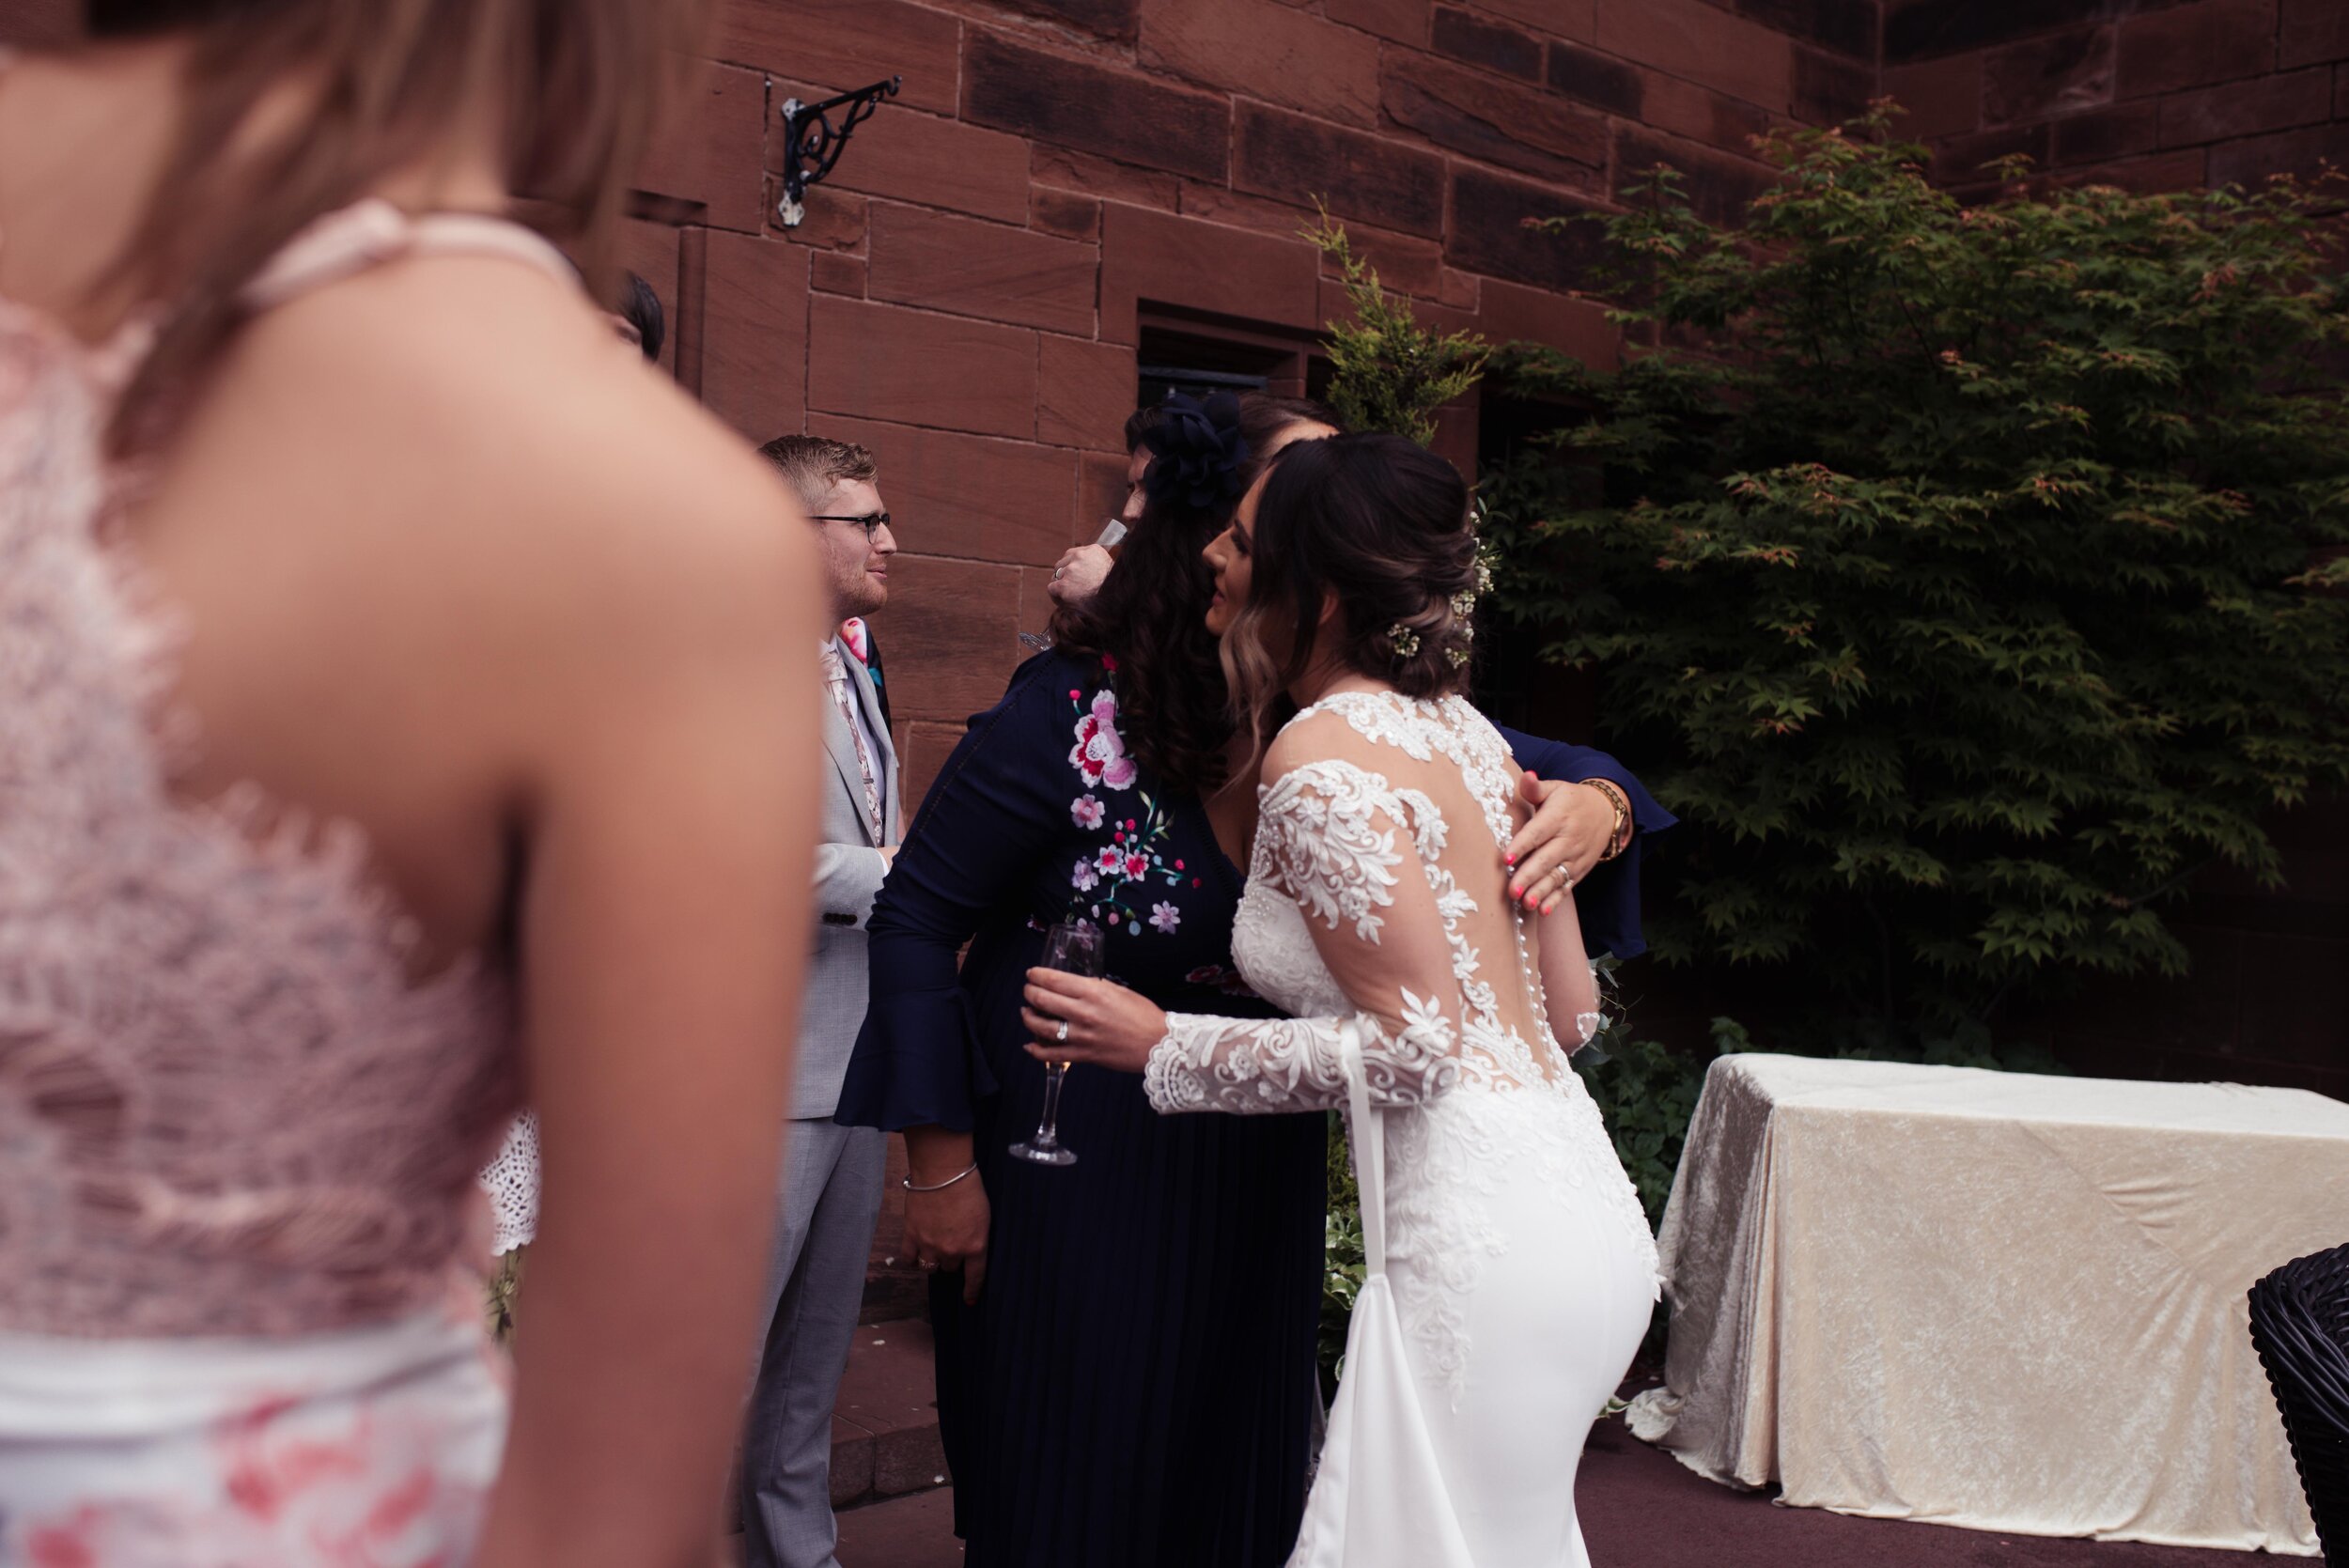 A wedding guest dressed in purple gives the bride a cuddle outside Abbey House